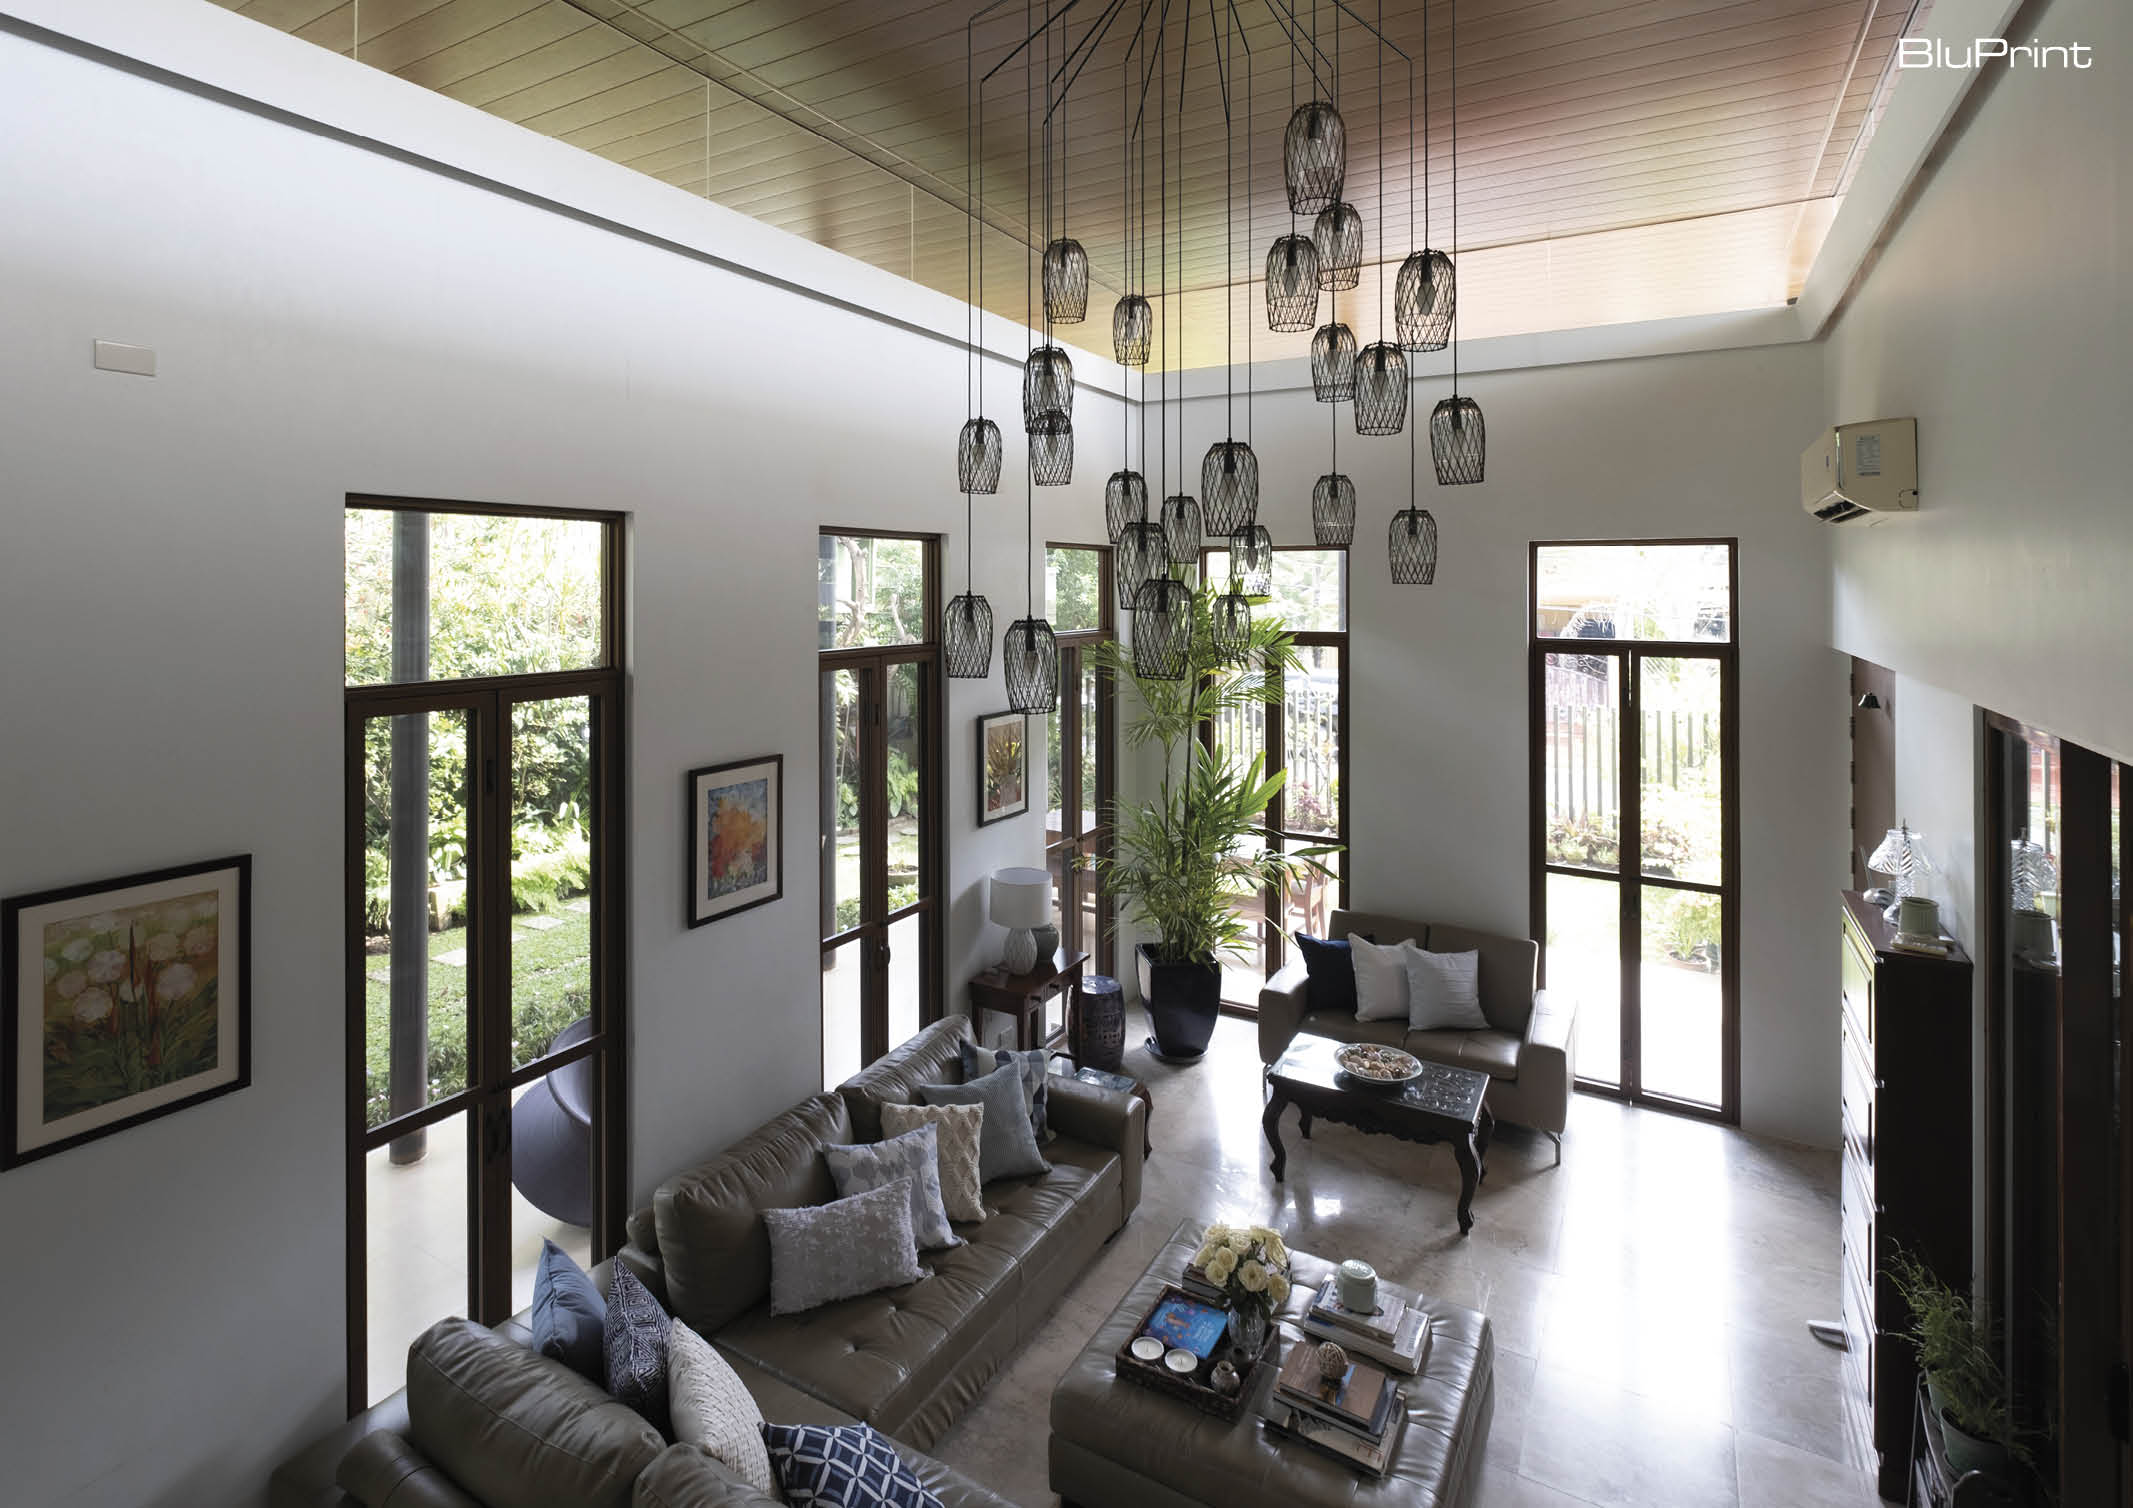 View of the living room with modern chandelier and double height ceilings